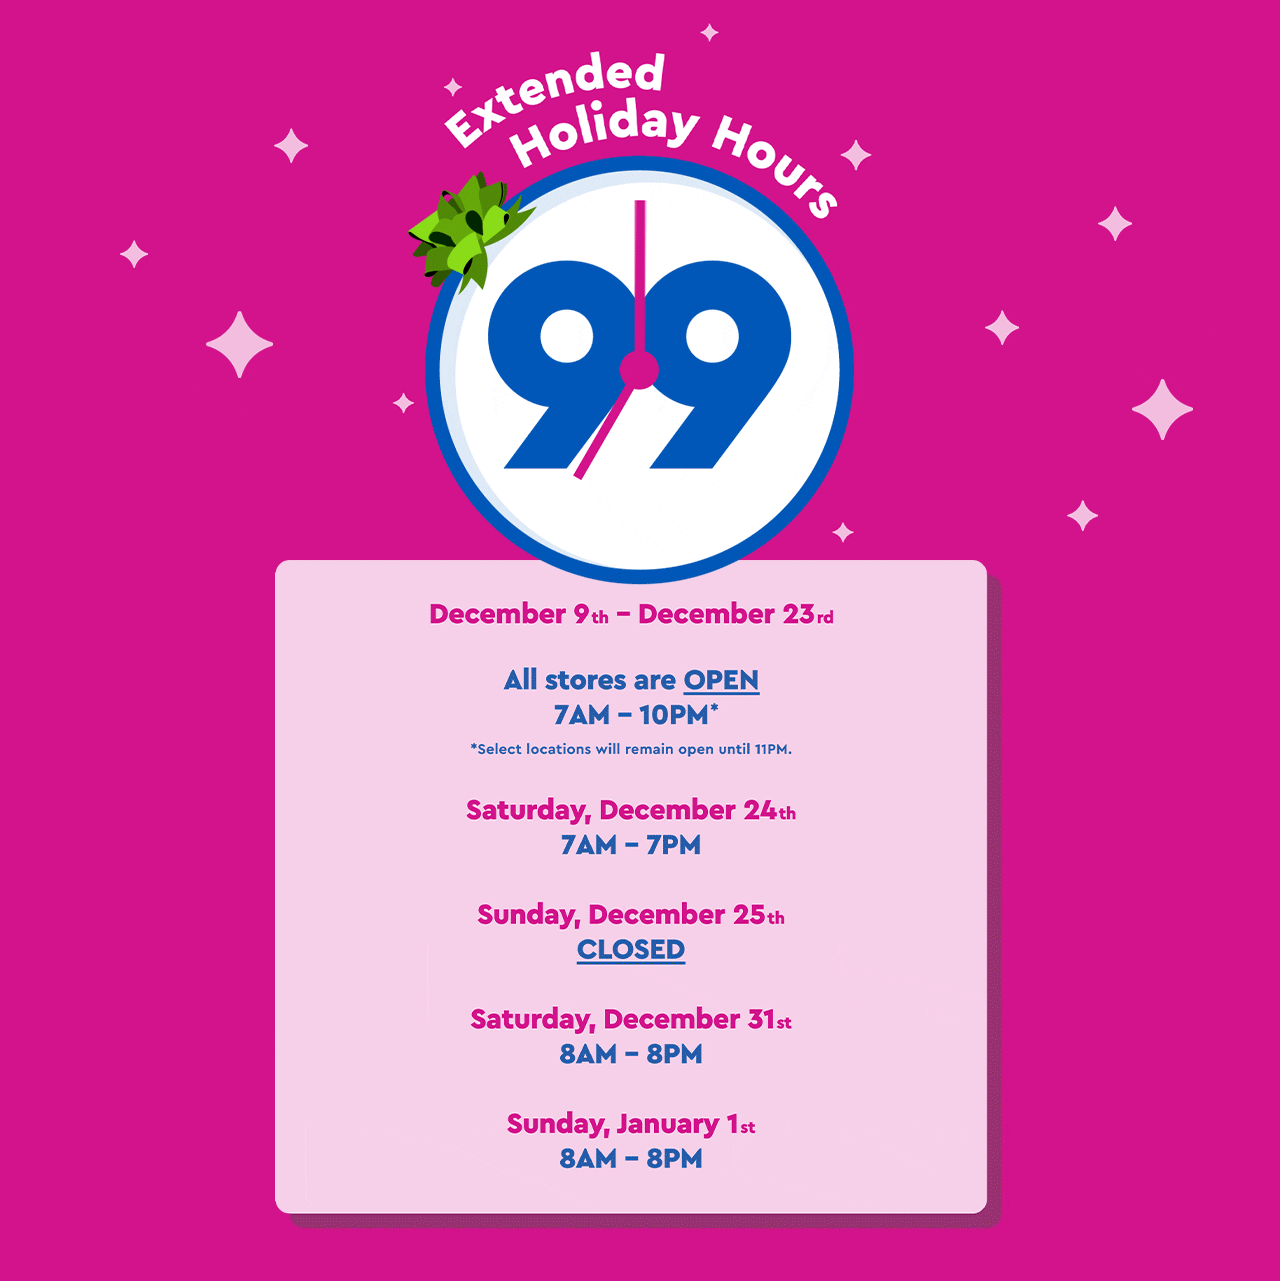 Extended Holiday Hours! 99 Cents Only Stores